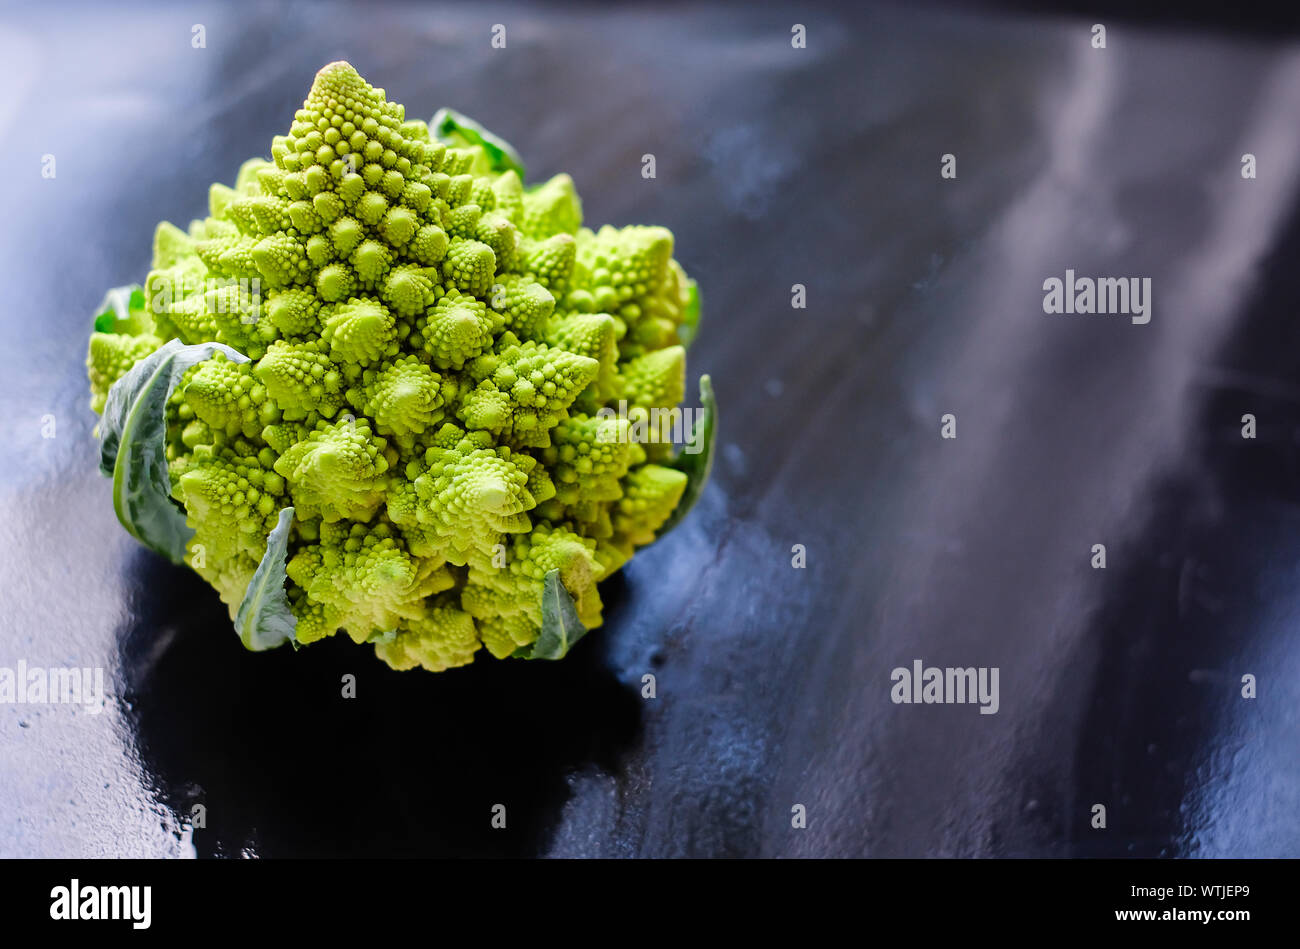 Amazing fresh green Romanesco broccoli or Roman cauliflower on wet dark background. Its form is a natural approximation of a fractal. Close up view. Stock Photo